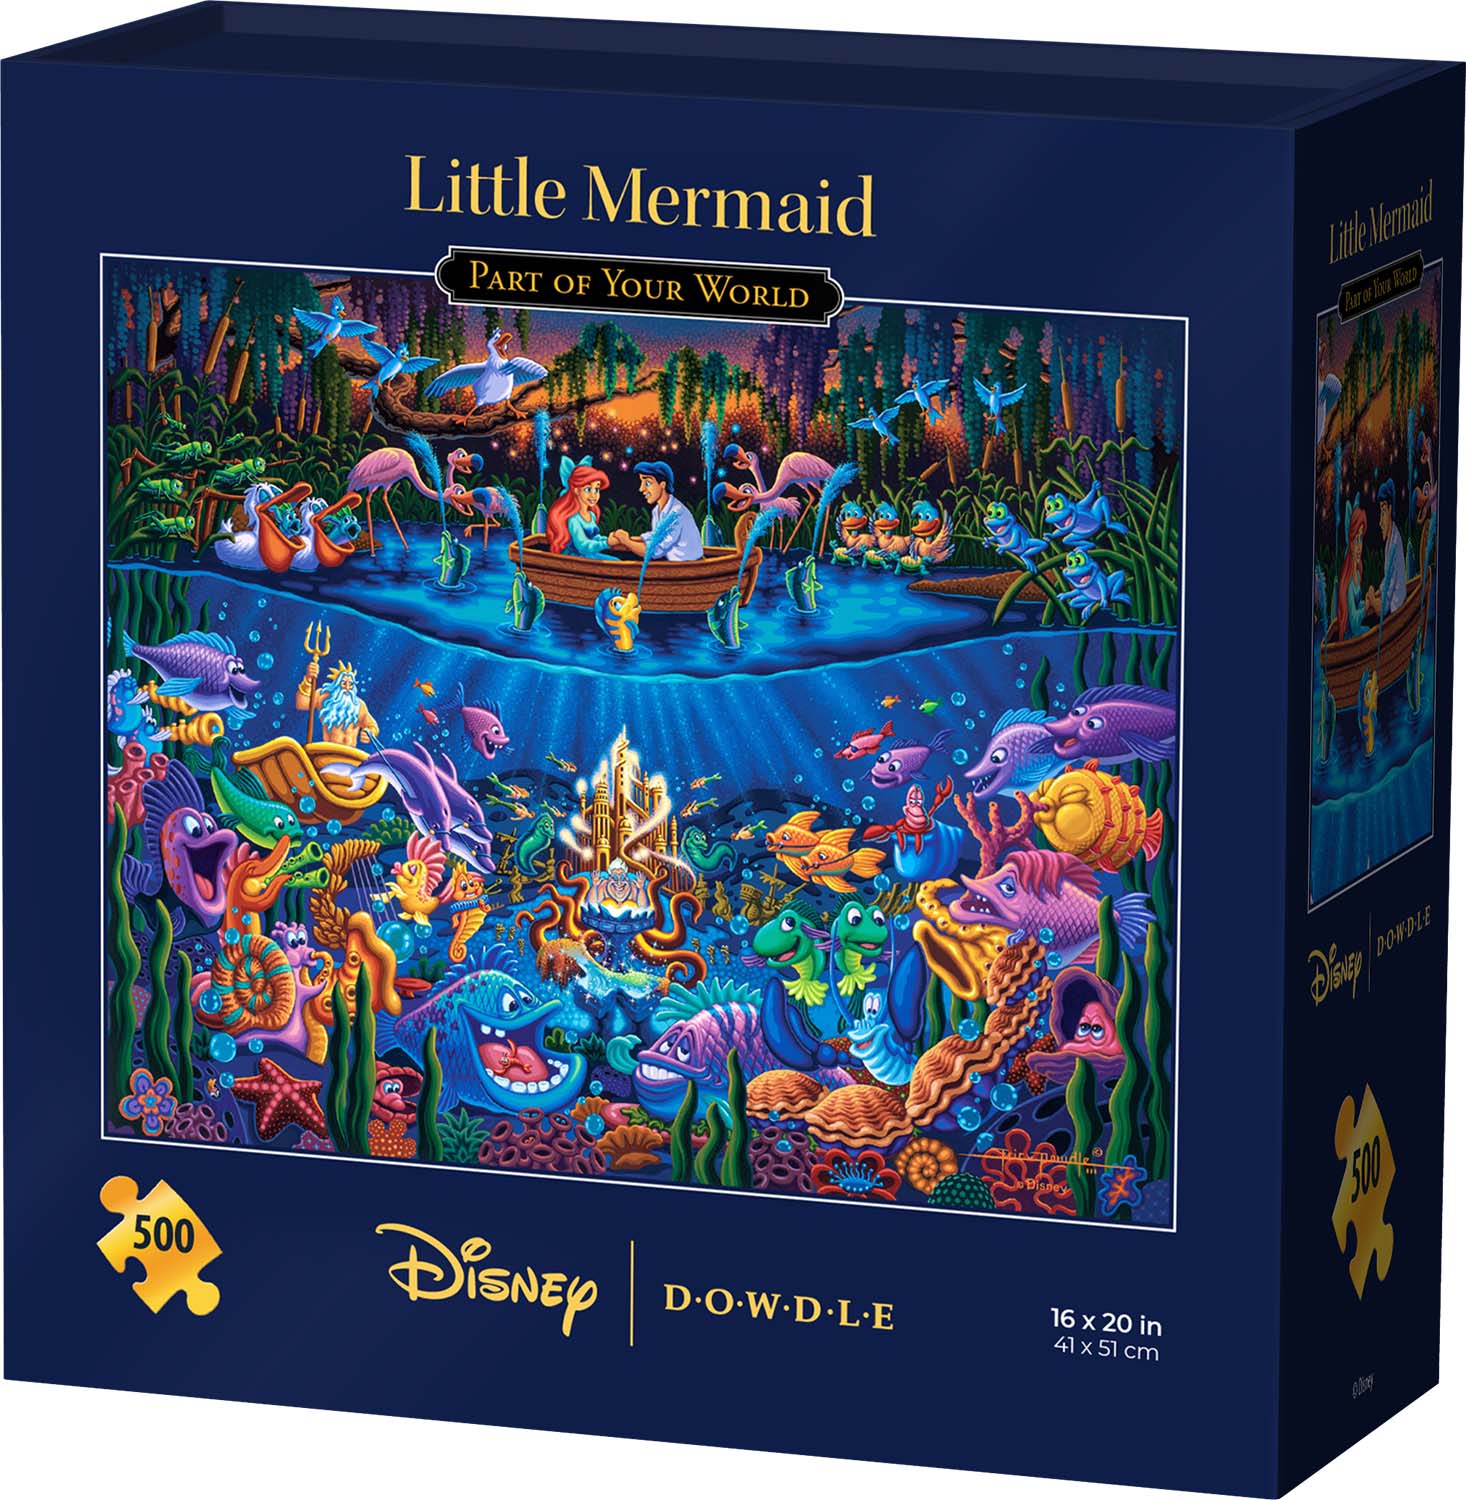 The Little Mermaid Part of Your World Disney Jigsaw Puzzle